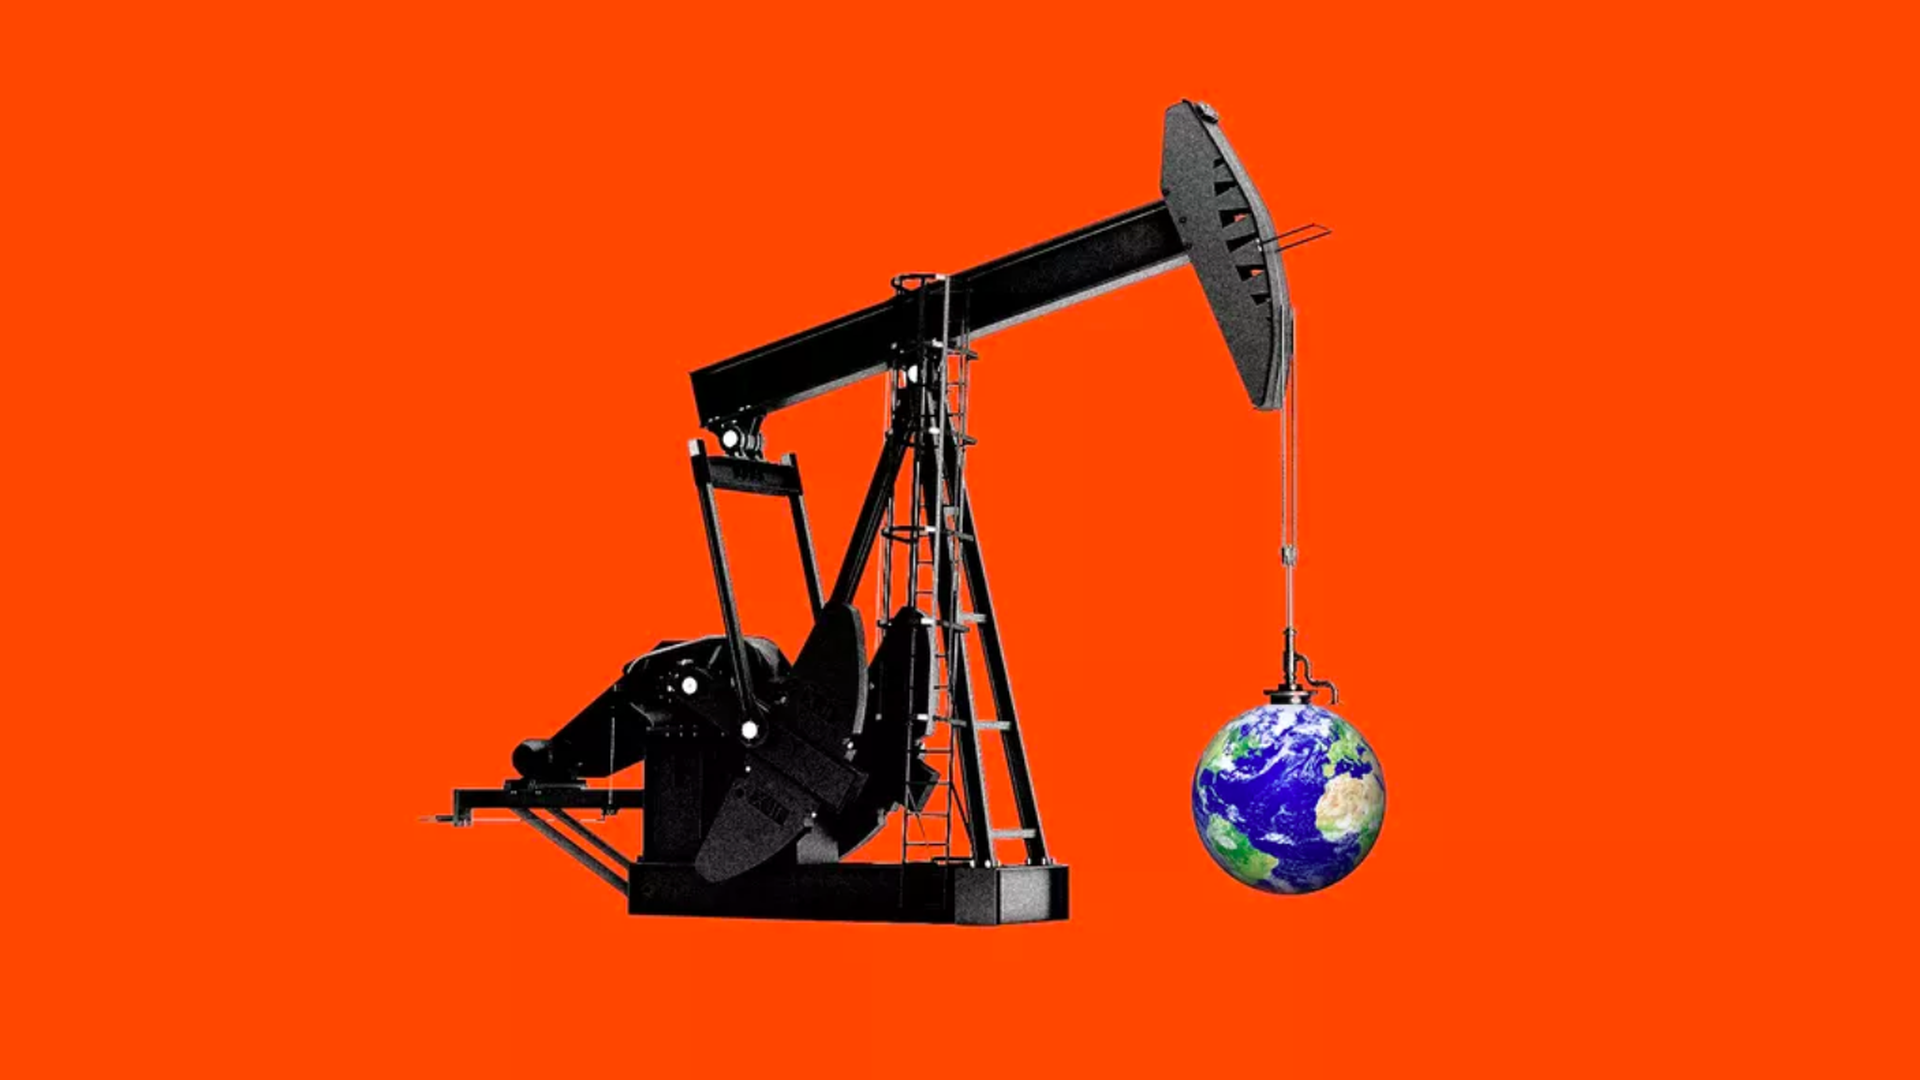 In this illustration, an oil rig hauls an Earth.